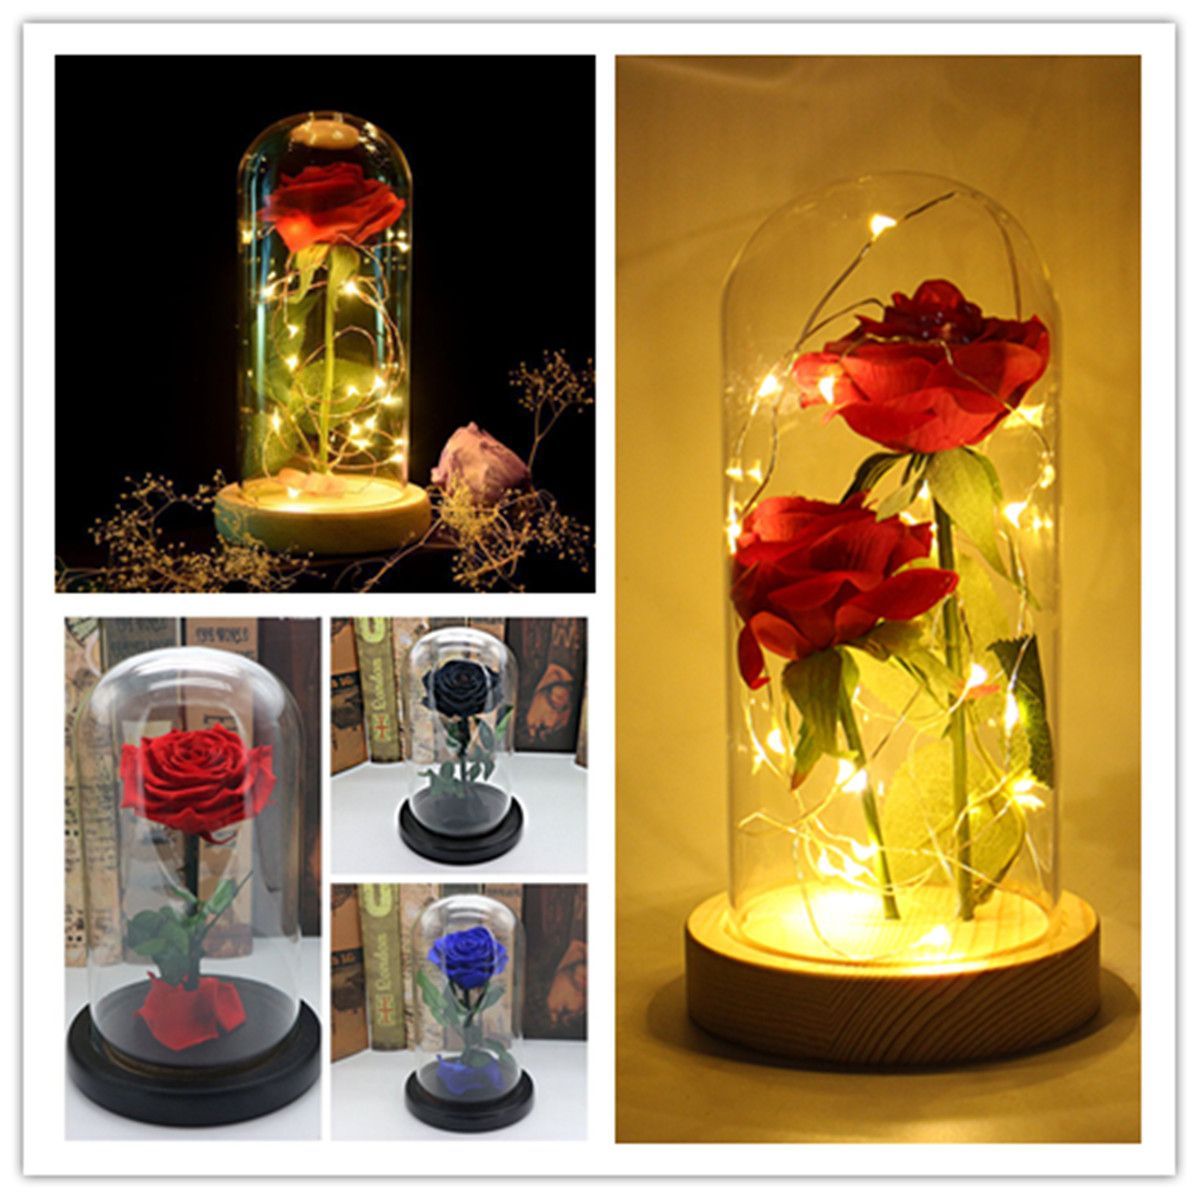 Forever-Rose-Beauty--The-Beast-Immortal-Fresh-Flower-Christmas-Unique-Gifts-Decorations-1640240